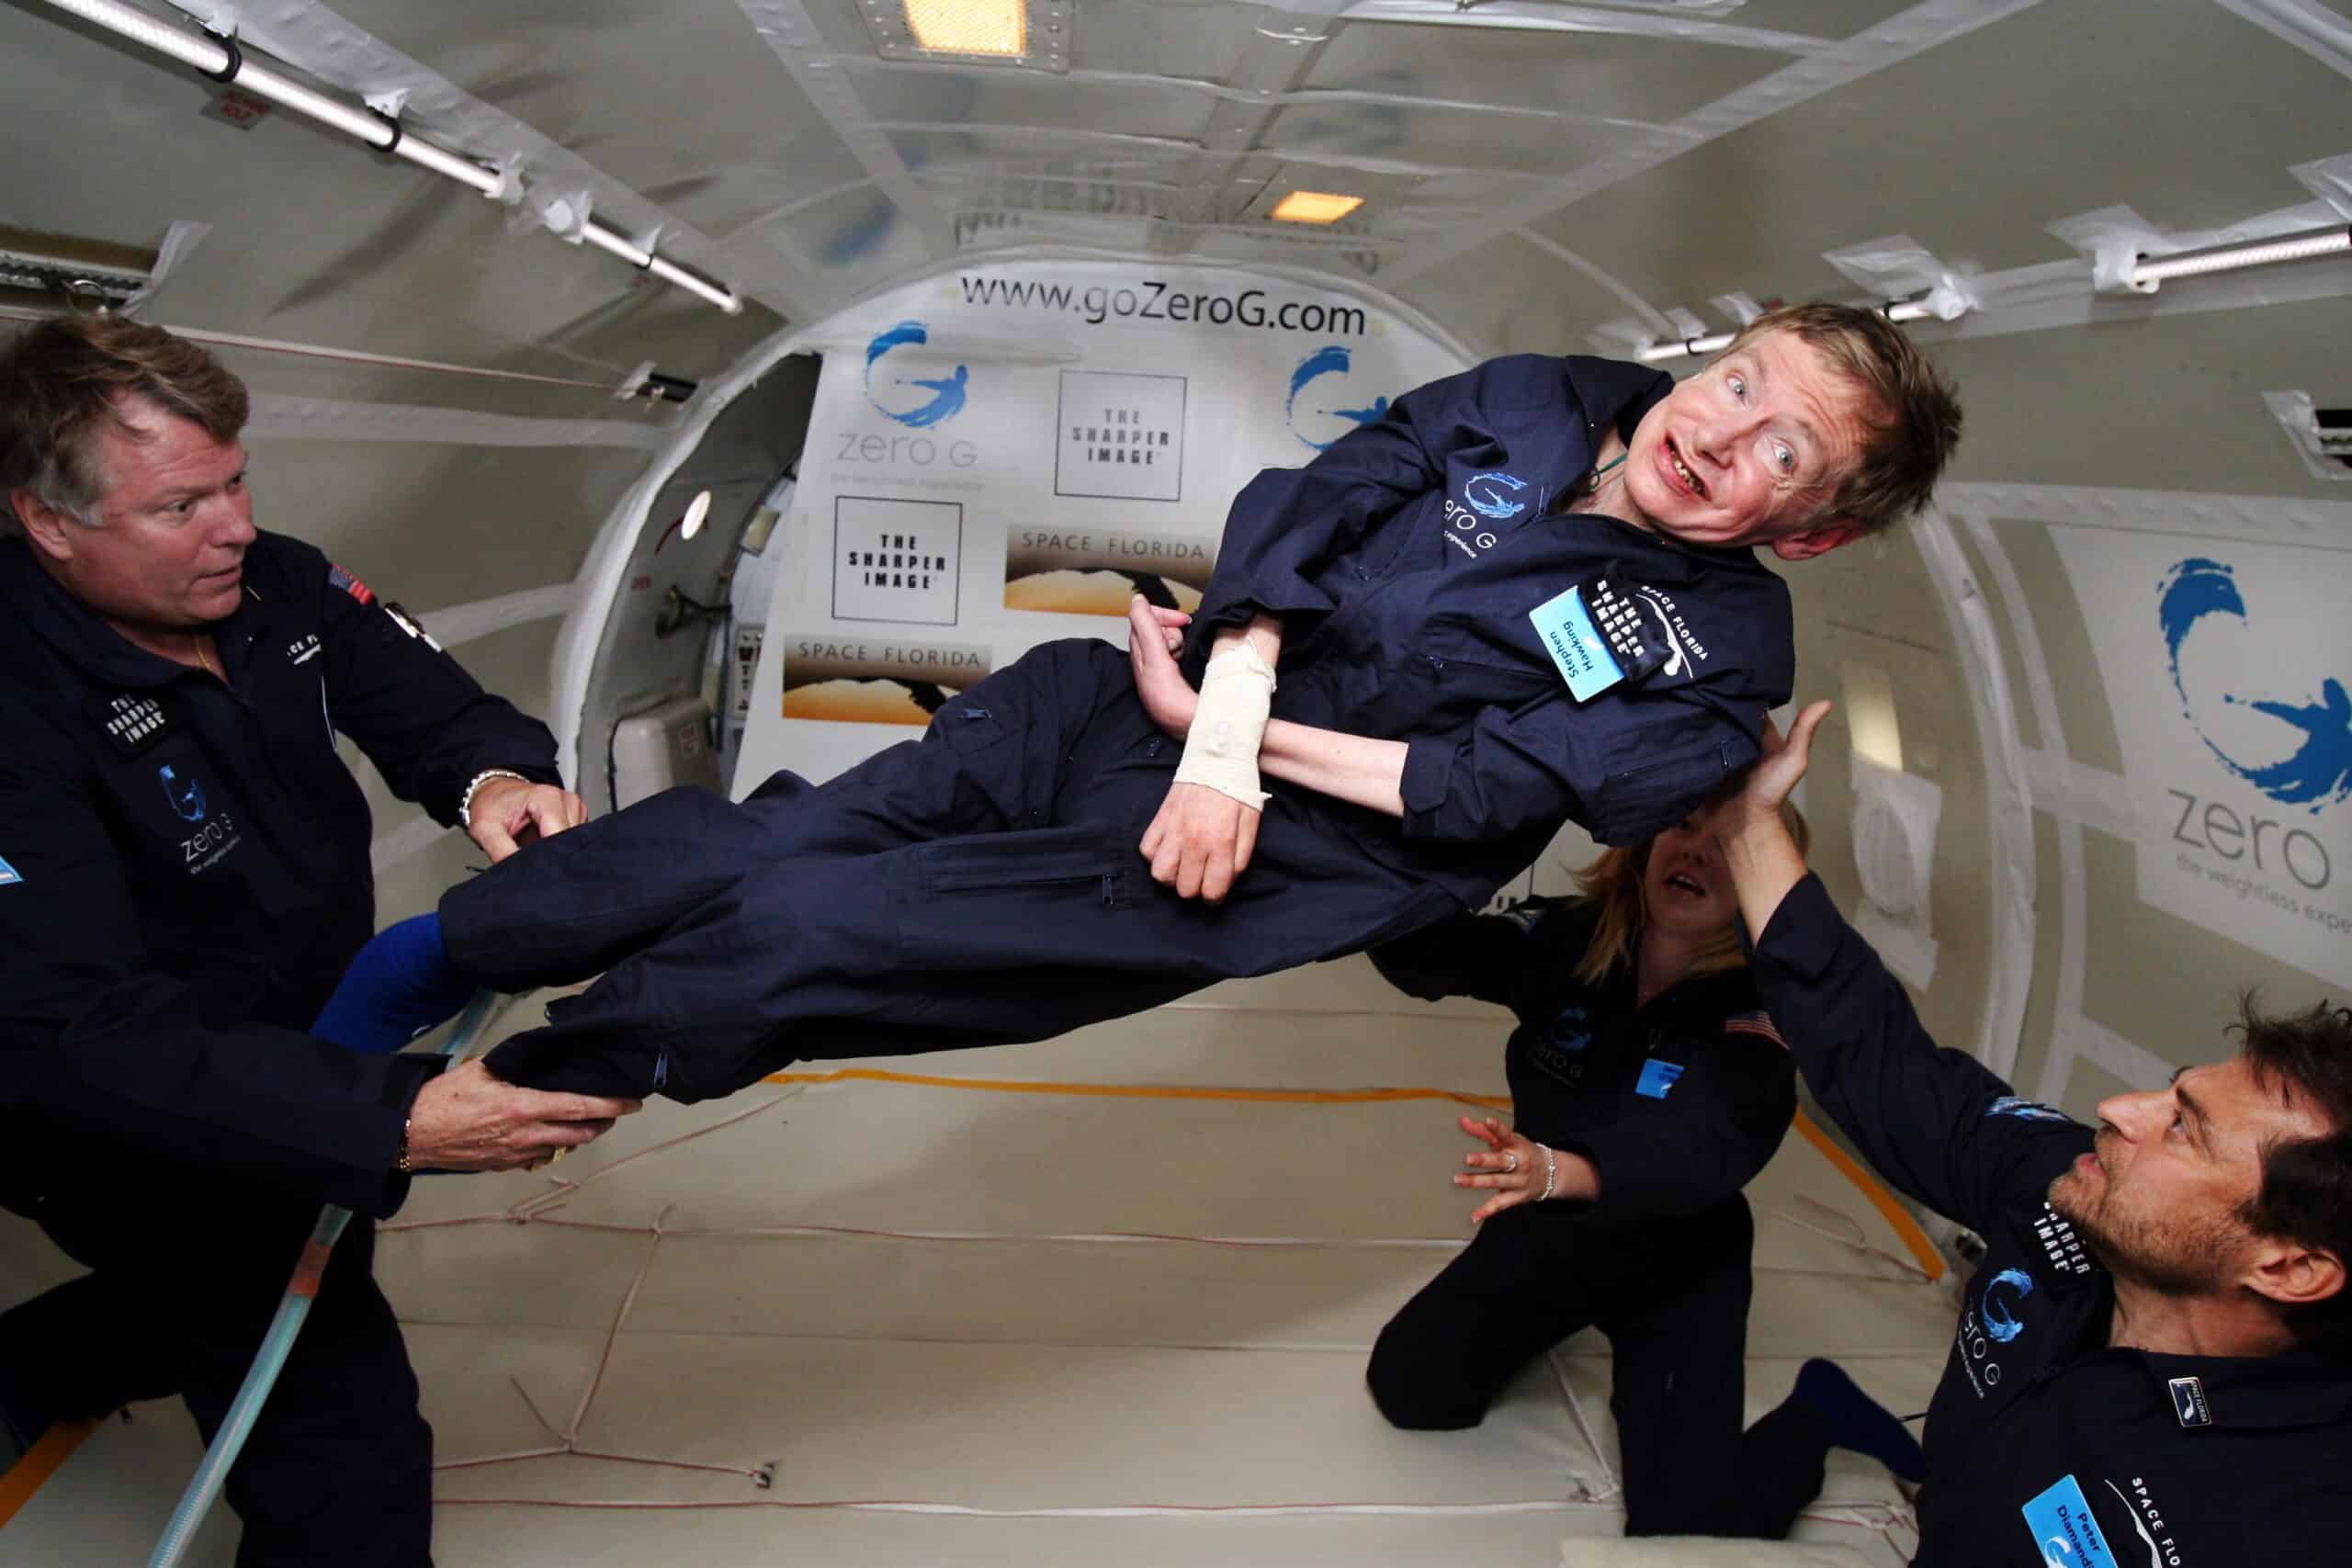 <p>Stephen Hawking was known for his wry and cutting sense of humor. That said, he wasn't without his wonder and appreciation for what lies beyond our planet. He once stated, <strong>"Remember to look up at the stars and not down at your feet. Try to make sense of what you <a href="https://history-computer.com/see-the-70s-come-to-life-in-these-15-pictures/?utm_campaign=msn&utm_source=msn_slideshow&utm_content=542575&utm_medium=in_content" rel="noopener">see</a> and wonder about what makes the universe exist. Be curious. And however difficult life may seem, there is always something you can do and succeed at. It matters that you don’t just give up.”</strong></p><p><span>Would you please let us know what you think about our content? <p>Agree? Tell us by clicking the “Thumbs Up” button above.</p> Disagree? Leave a comment telling us what you’d change.</span></p>